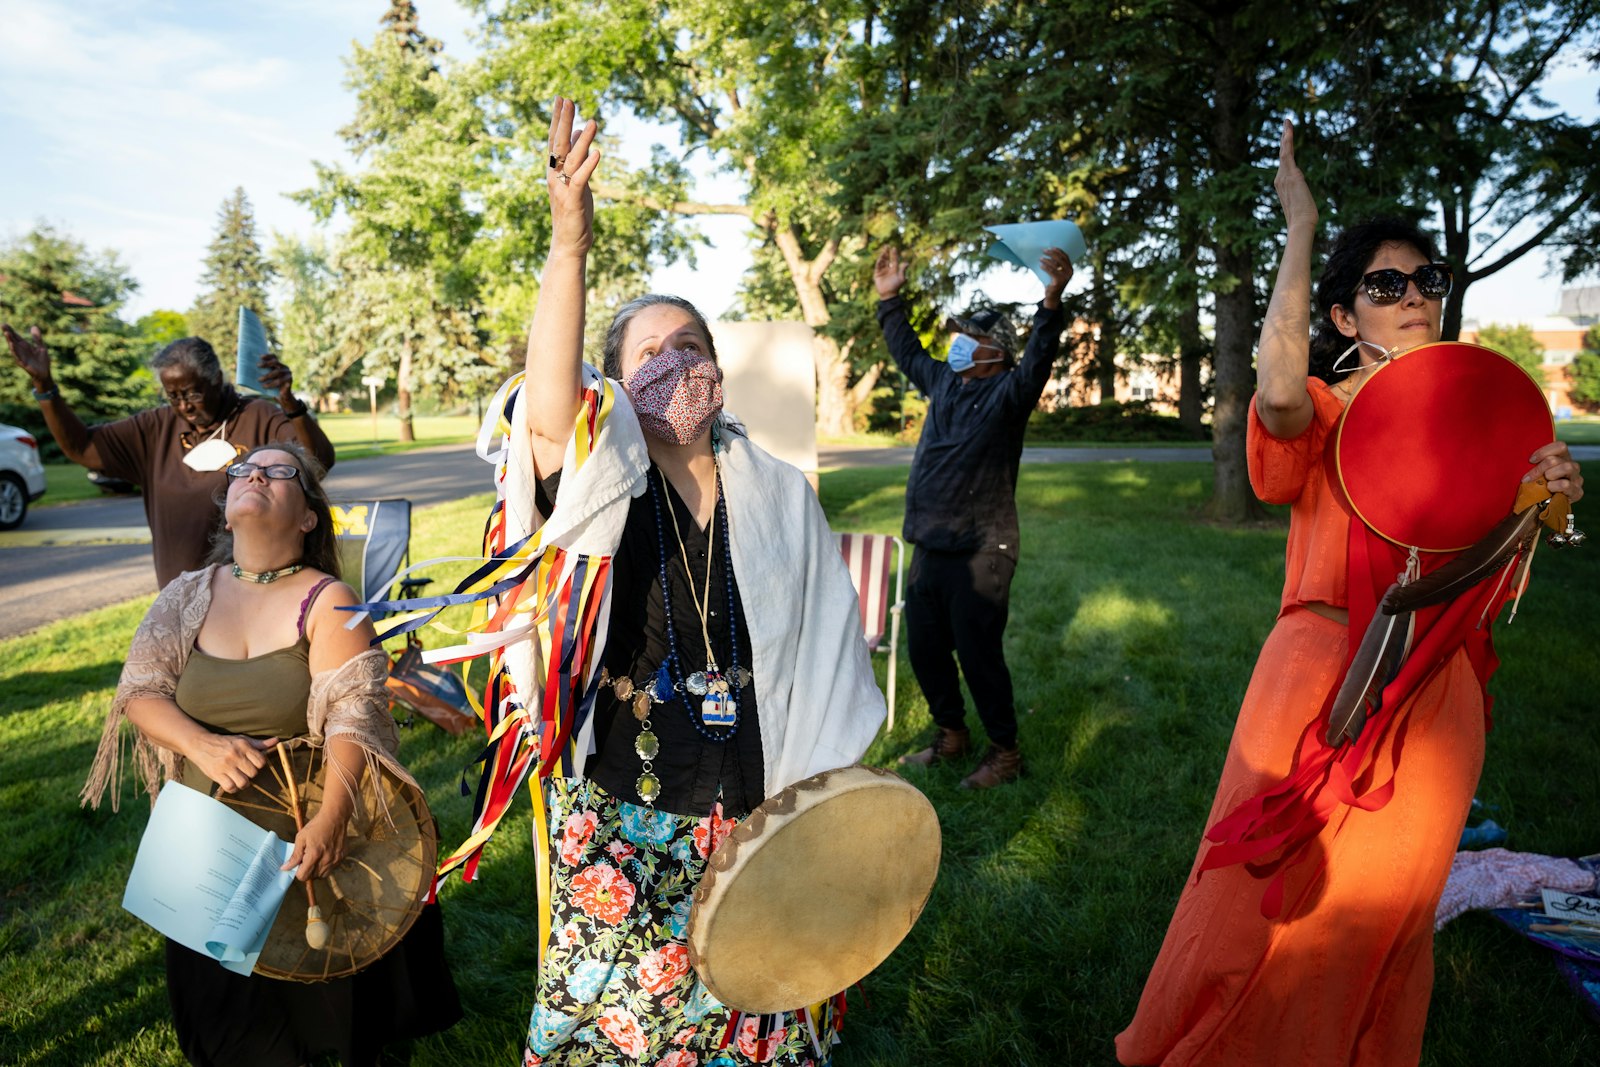 Members of the St. Kateri Tekakwitha Nicholas Black Elk Circle celebrate the summer solstice in June 2022 on the grounds of the Felician Sisters' motherhouse in Livonia. The circle, which currently has about 12 members, meets regularly to pray together and discover their common heritage and Catholic faith. (Valaurian Waller | Detroit Catholic)